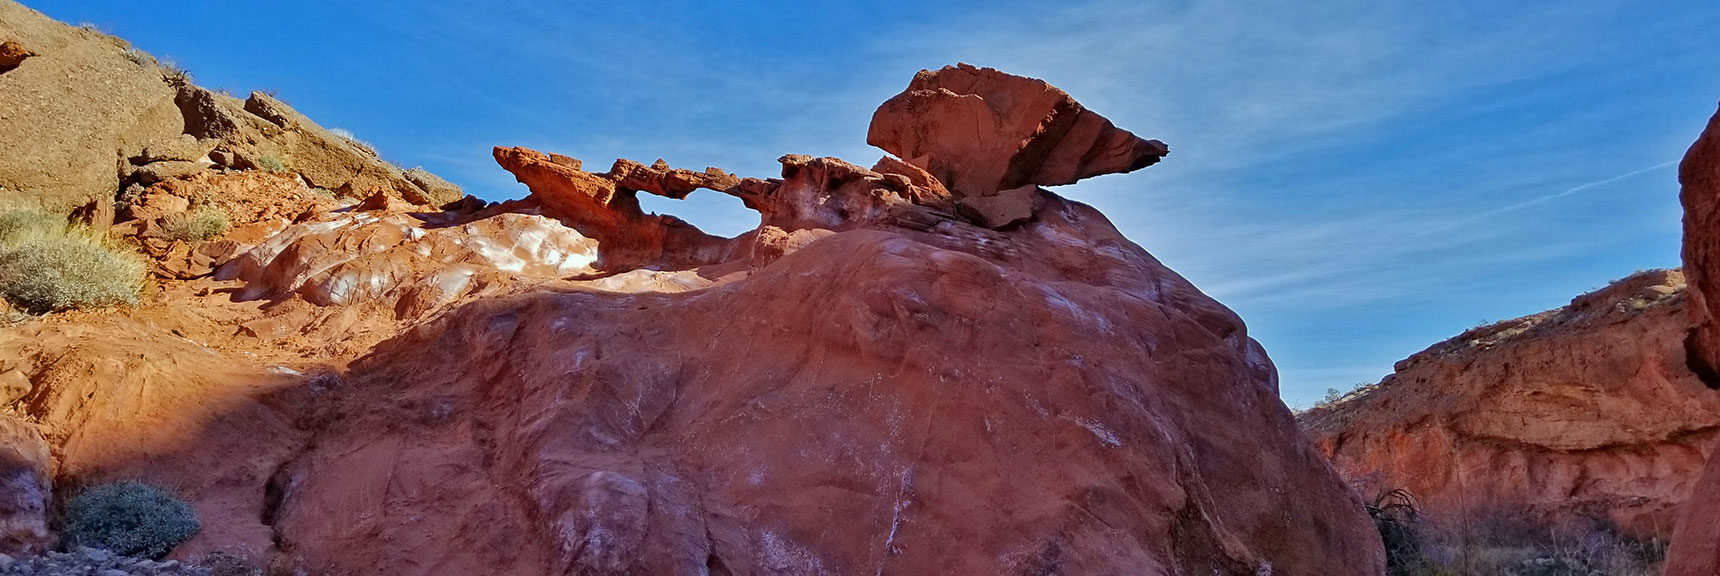 Return Trip, Missed This on the Way on Charlie's Spring Trail, Valley of Fire State Park, Nevada